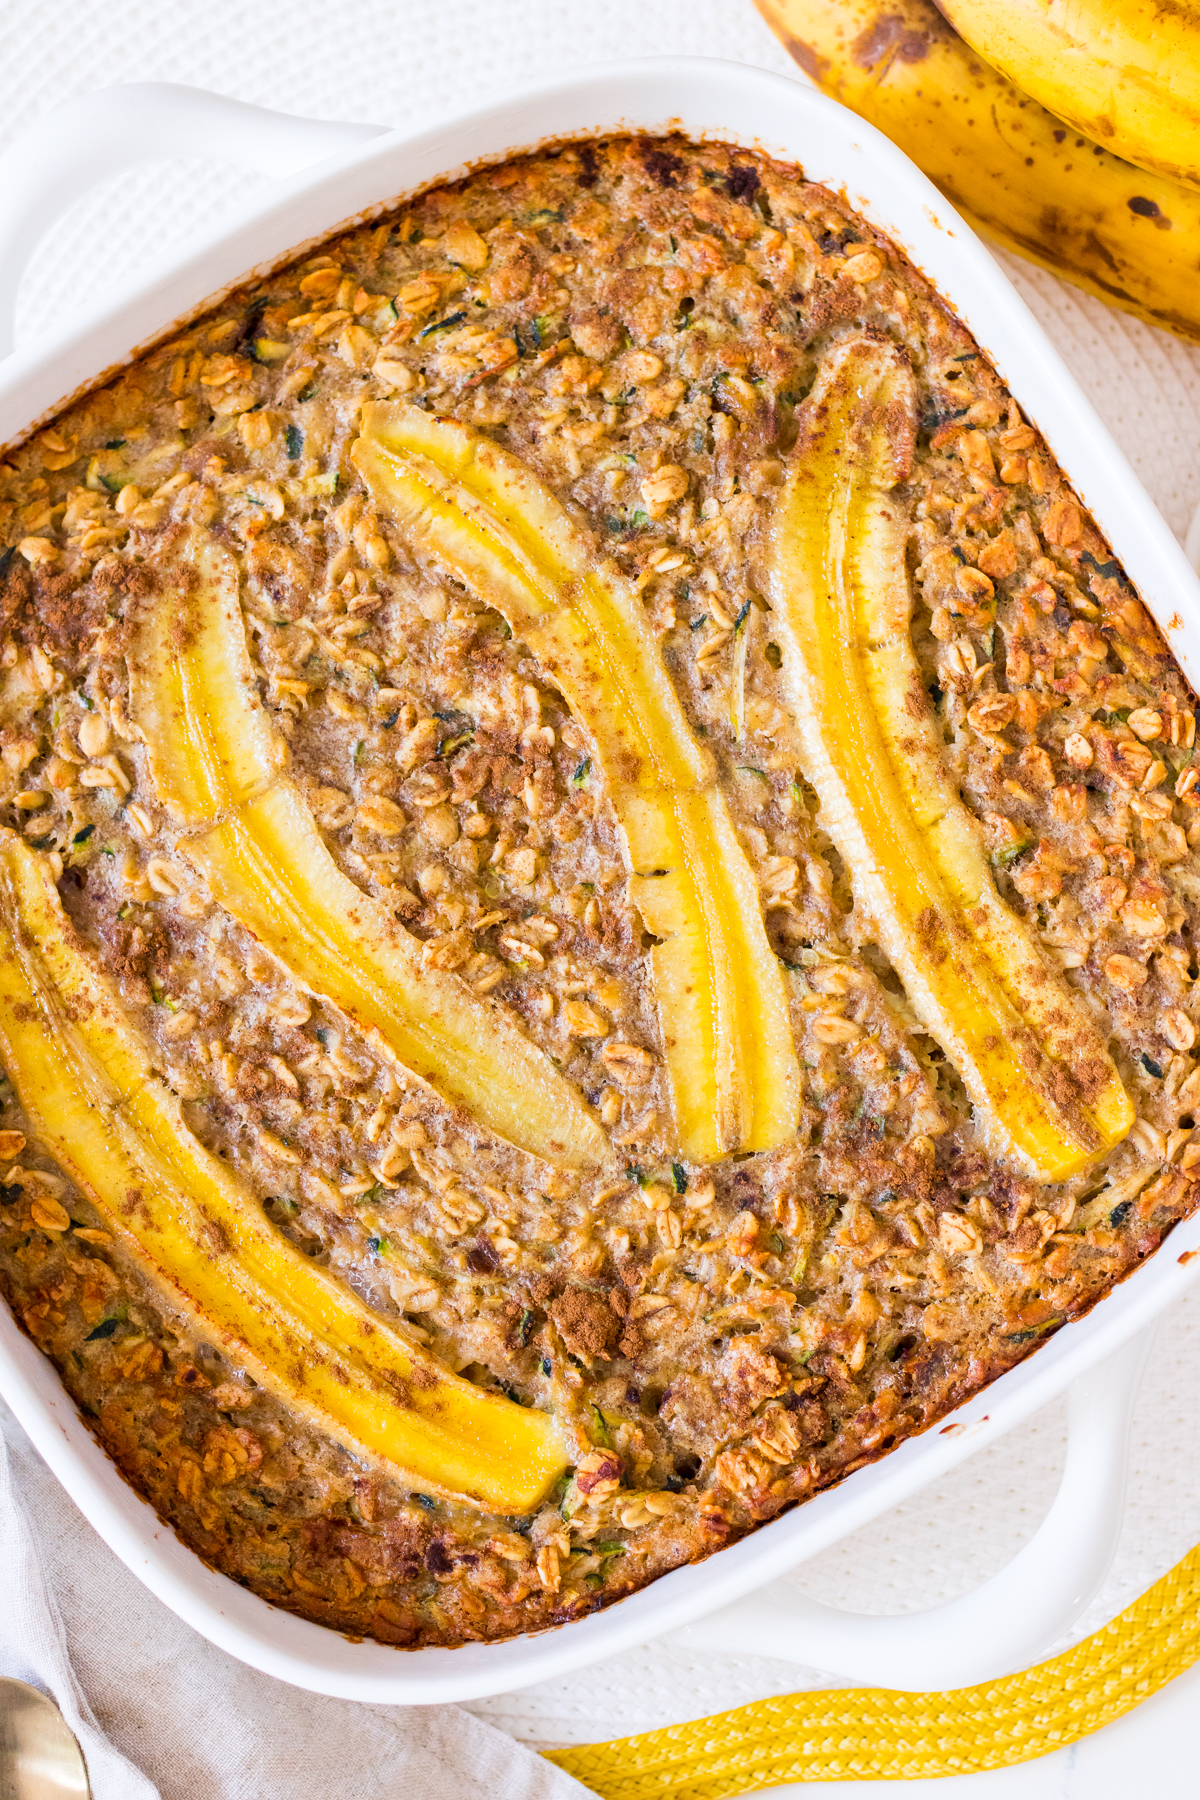 Oatmeal bake with sliced banana on top in a square baking dish